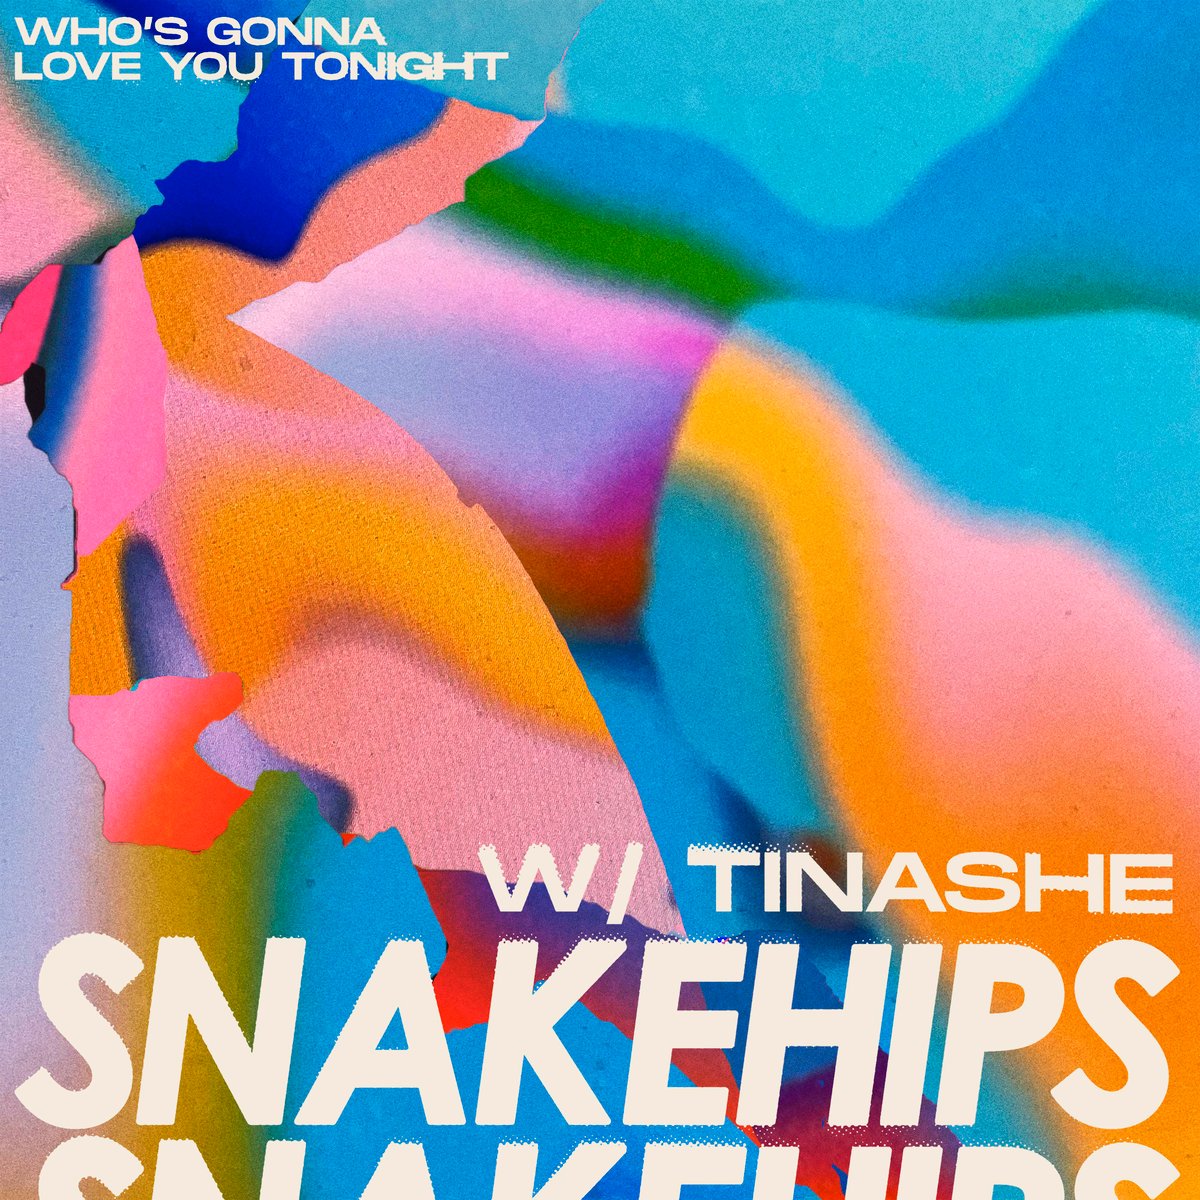 Download Snakehips Whos Gonna Love You Tonight ft Tinashe MP3 Download